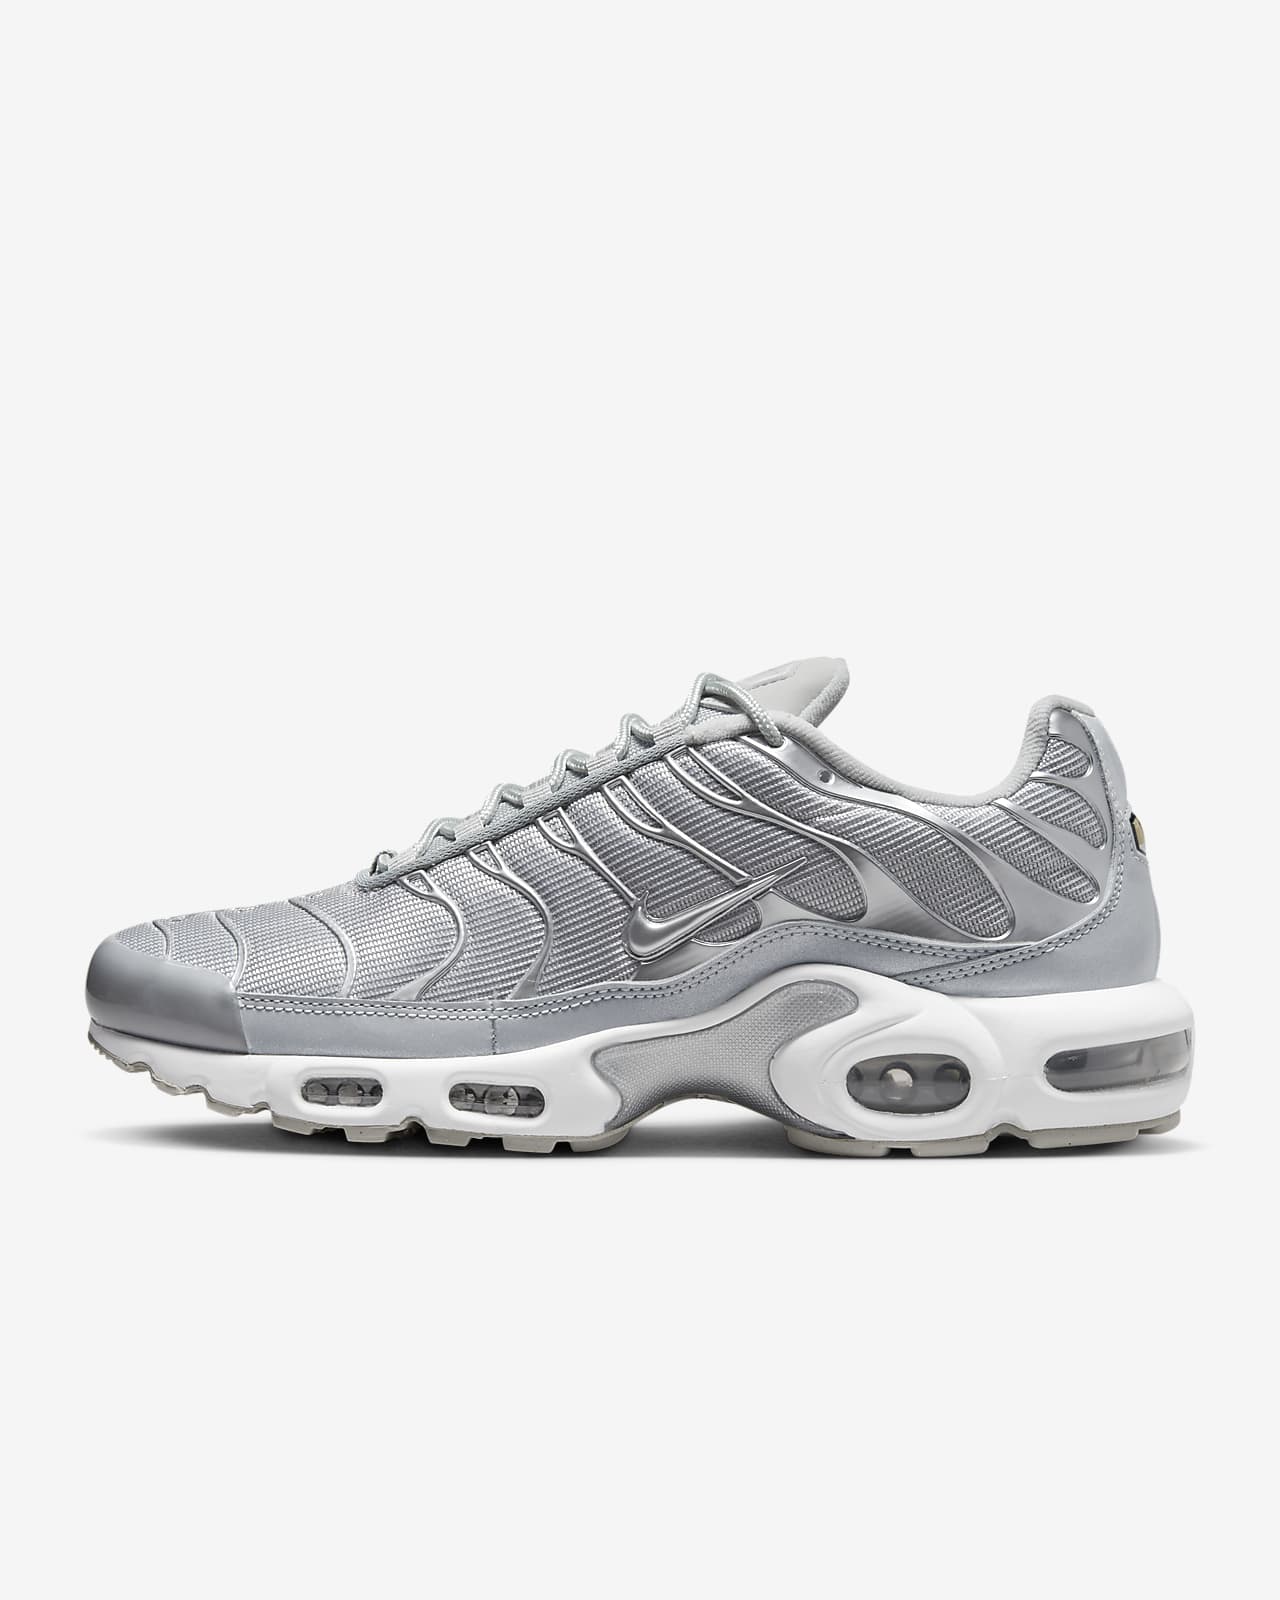 Chaussure Nike Max Plus pour homme. CA